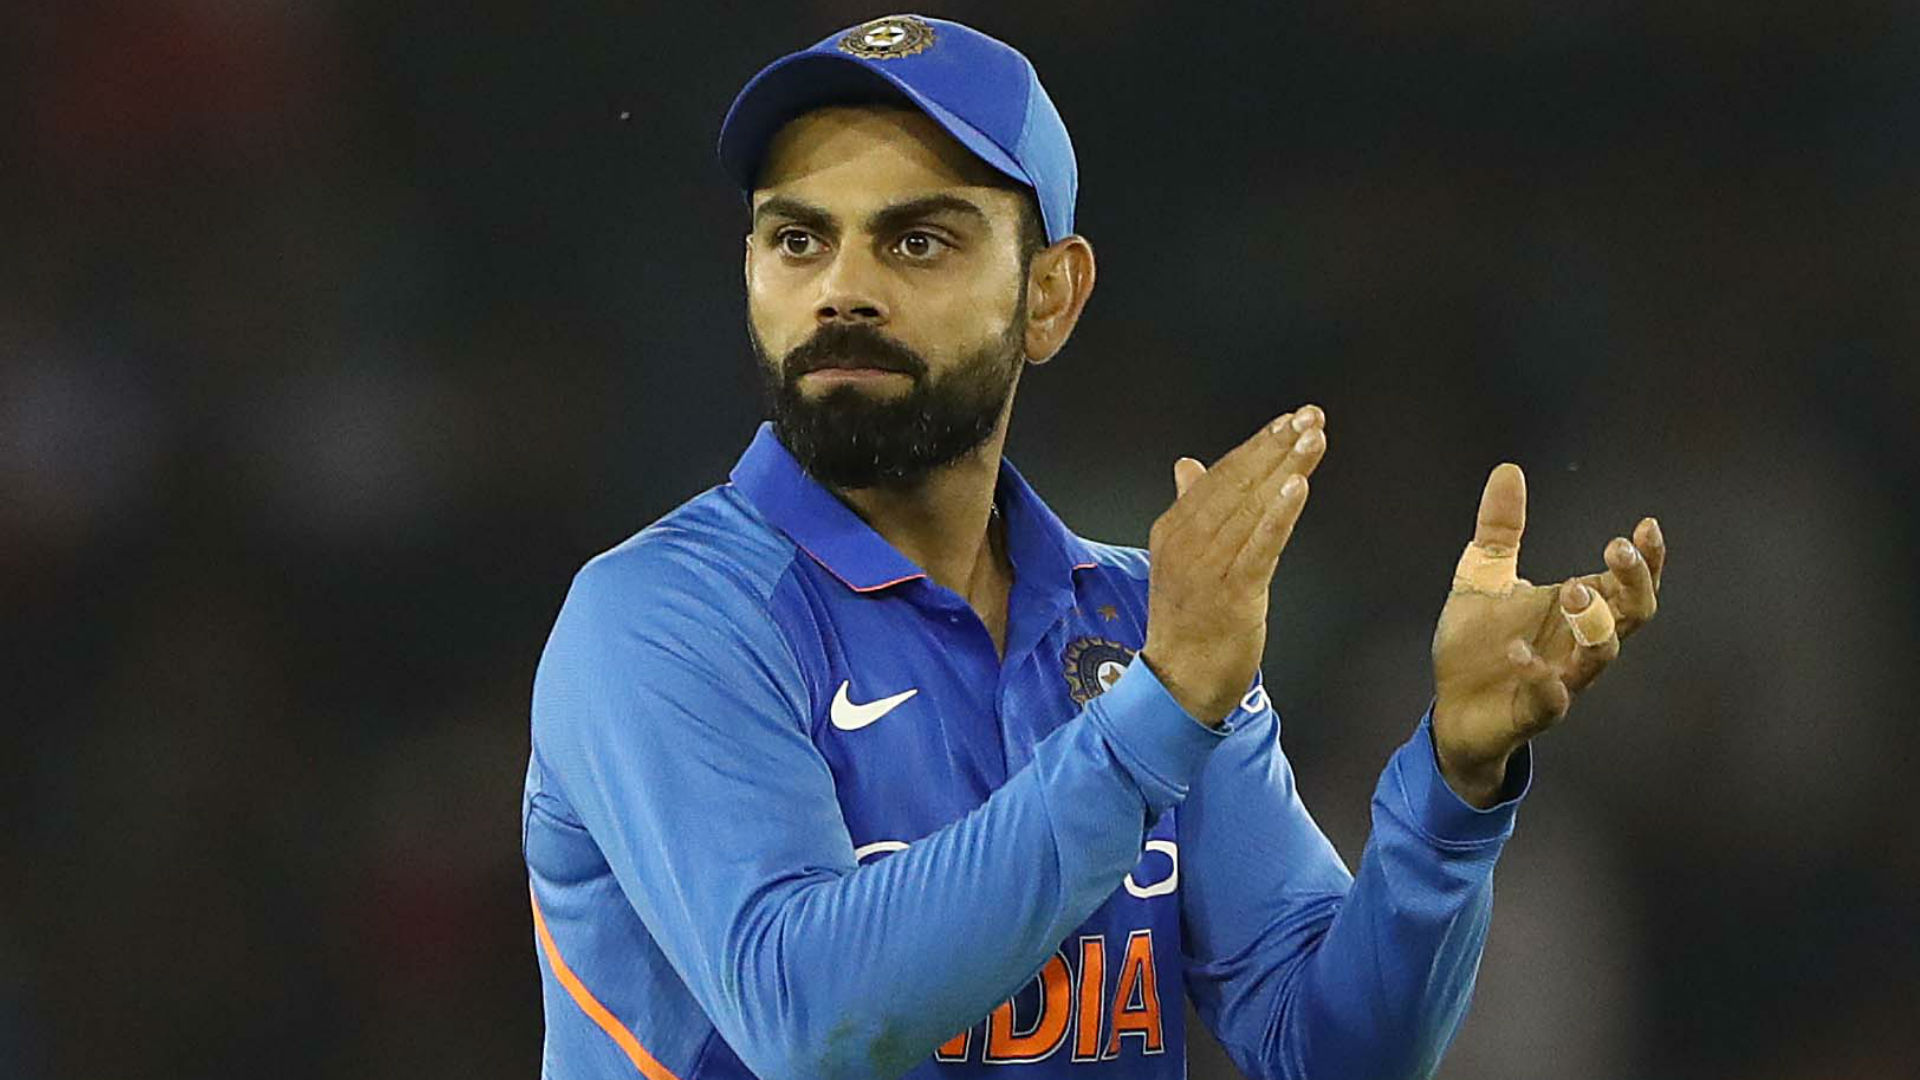 Not for the first time in his career, Virat Kohli timed a run chase to perfection as India defeated South Africa in Mohali on Wednesday.